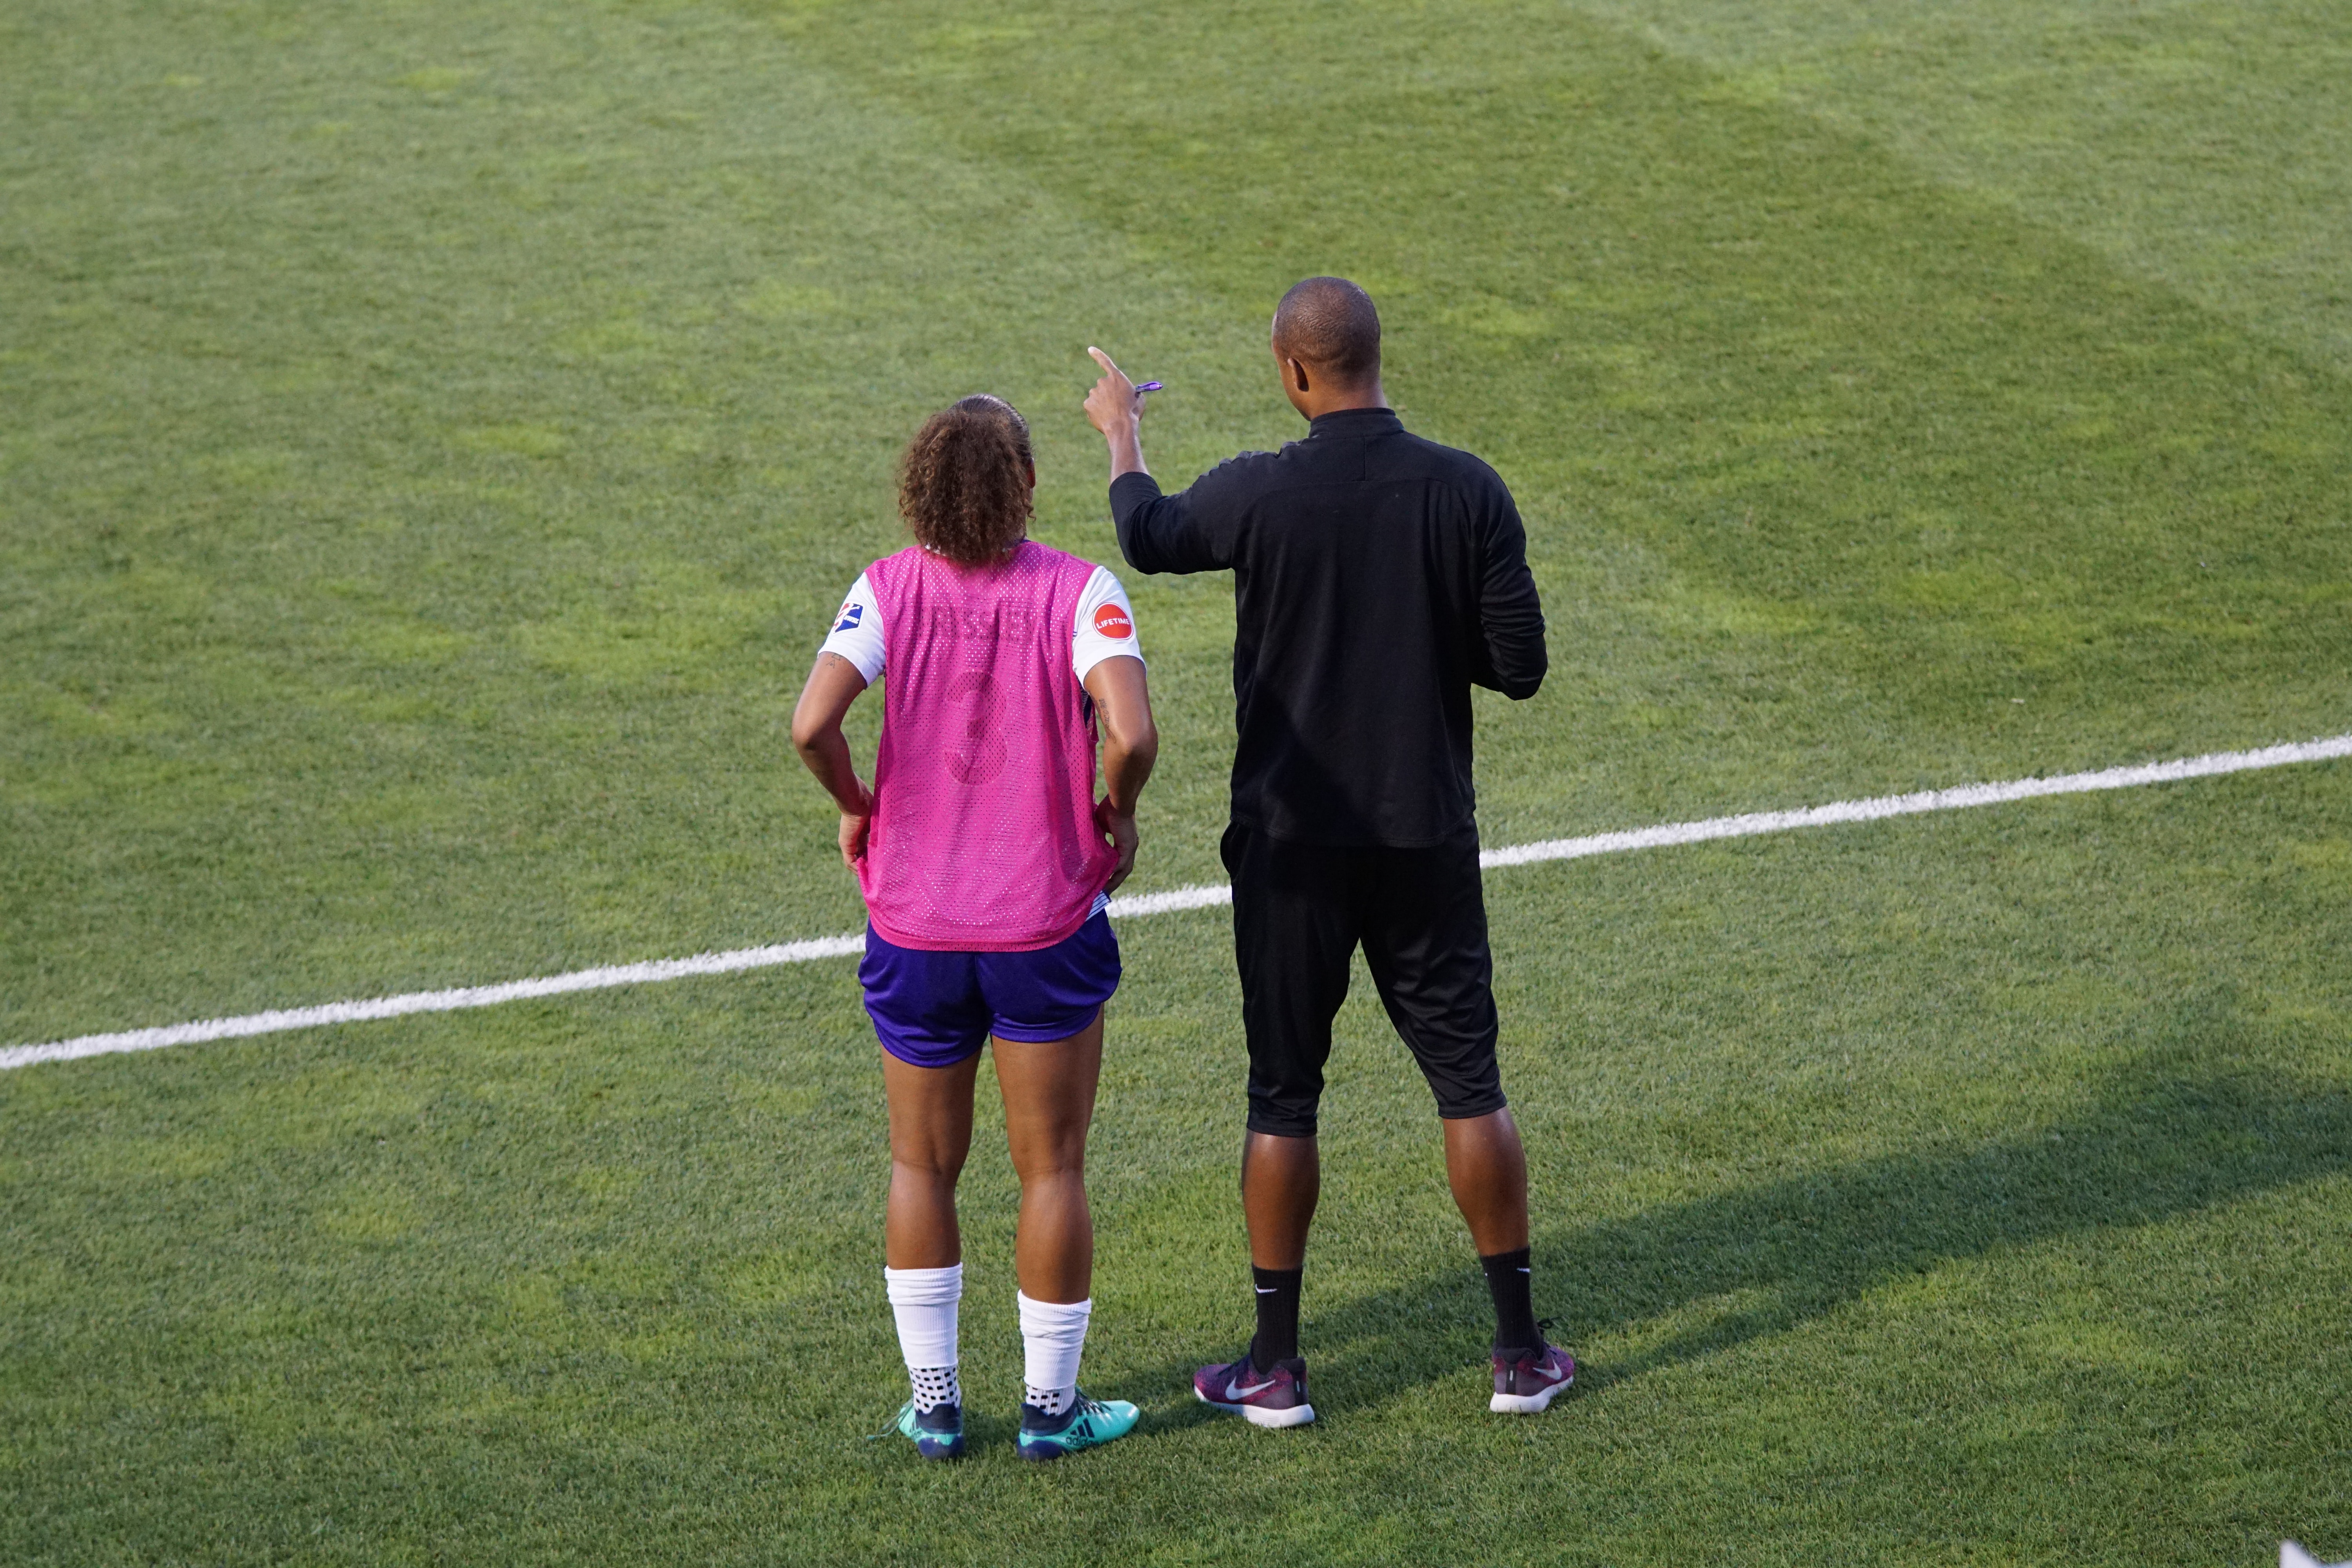 A soccer coach giving instructions to a substitute player on the sidelines.